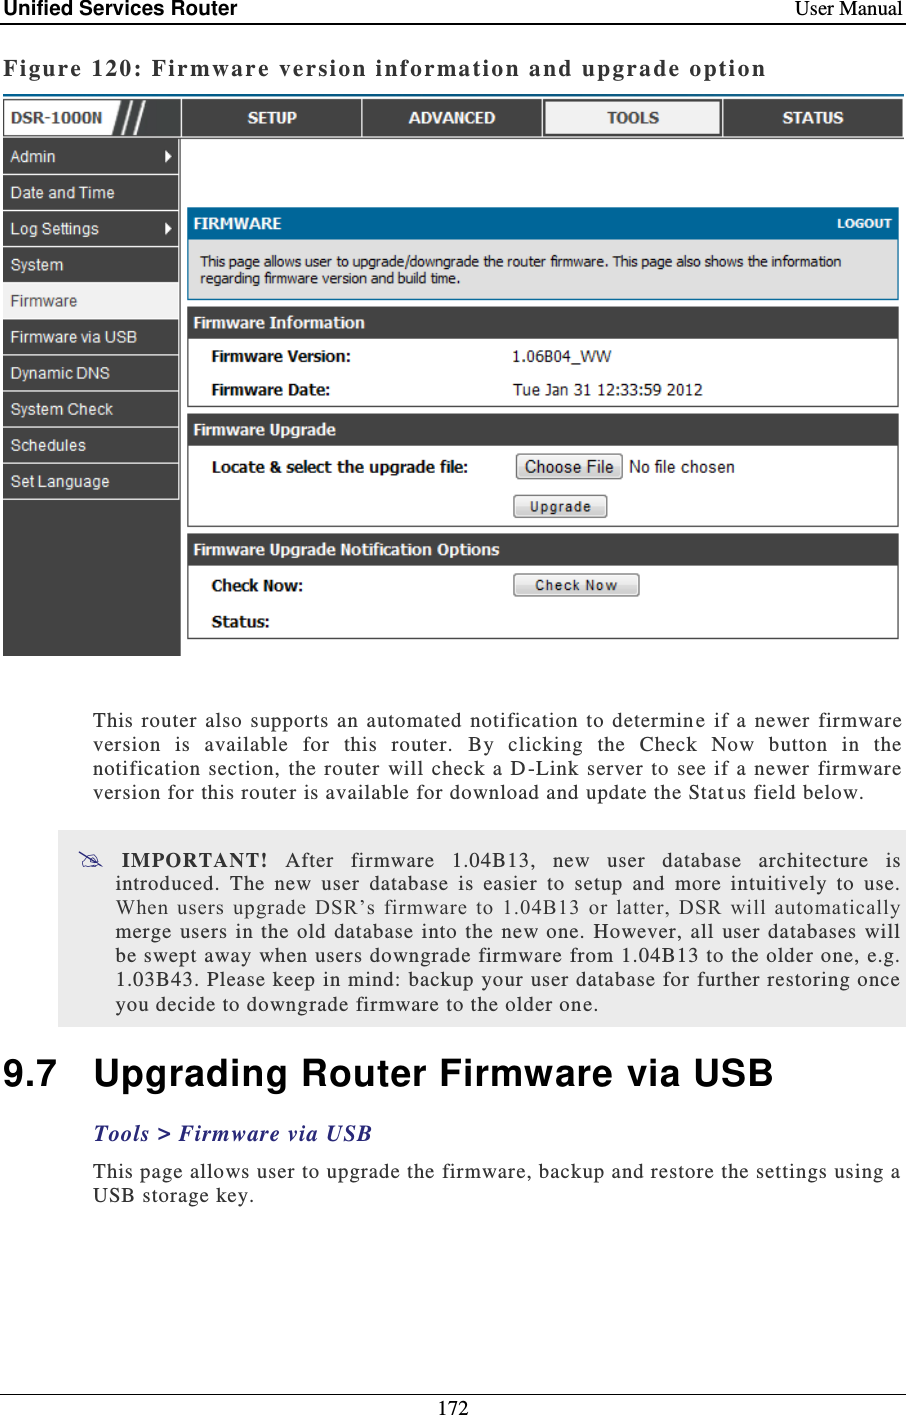 Unified Services Router    User Manual 172  Figure 120: Fir mwar e version informatio n and upgrade o ptio n    This  router  also  supports  an automated  notification  to  determin e  if  a  newer  firmware version  is  available  for  this  router.  By  clicking  the  Check  Now  button  in  the notification  section,  the  router  will  check a  D-Link  server to  see if  a  newer  firmware version for this router is available for download and update the Stat us field below.   IMPORTANT!  After  firmware  1.04B13,  new  user  database  architecture  is introduced.  The  new  user  database  is  easier  to  setup  and  more  intuitively  to  use. When  users  upgrade  DSR’s  firmware  to  1.04B13  or  latter,  DSR  will  automatically merge  users  in  the  old database  into the  new  one.  However, all  user  databases  will be swept away  when users downgrade firmware from 1.04B13 to the older one, e.g. 1.03B43. Please keep in mind: backup your user database for further restoring once you decide to downgrade firmware to the older one. 9.7  Upgrading Router Firmware via USB Tools &gt; Firmware via USB This page allows user to upgrade the firmware, backup and restore the settings using a USB storage key. 